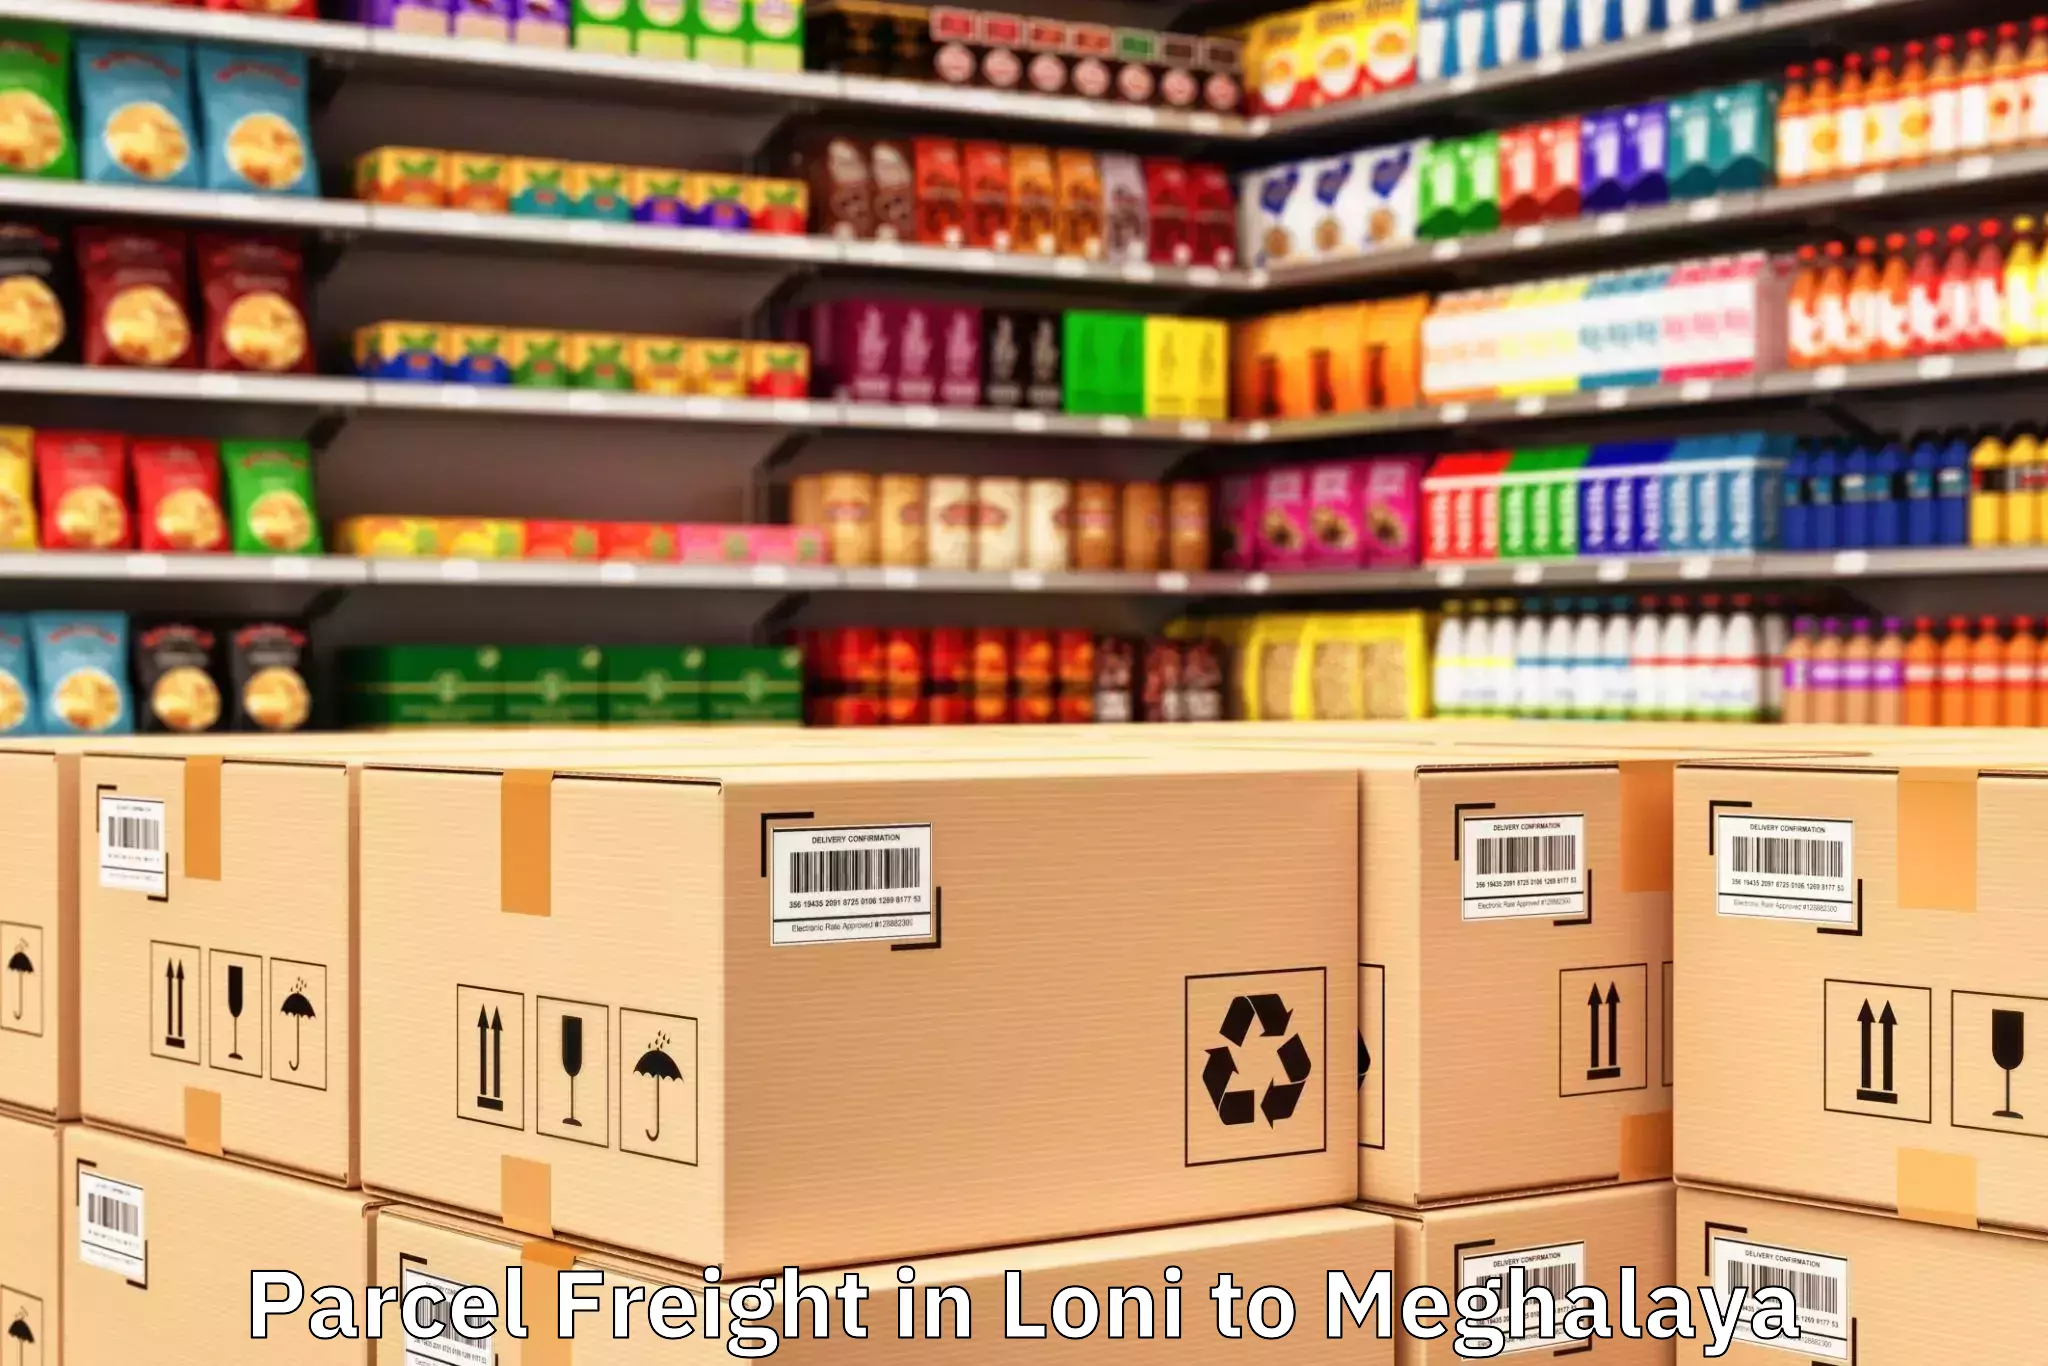 Affordable Loni to Meghalaya Parcel Freight